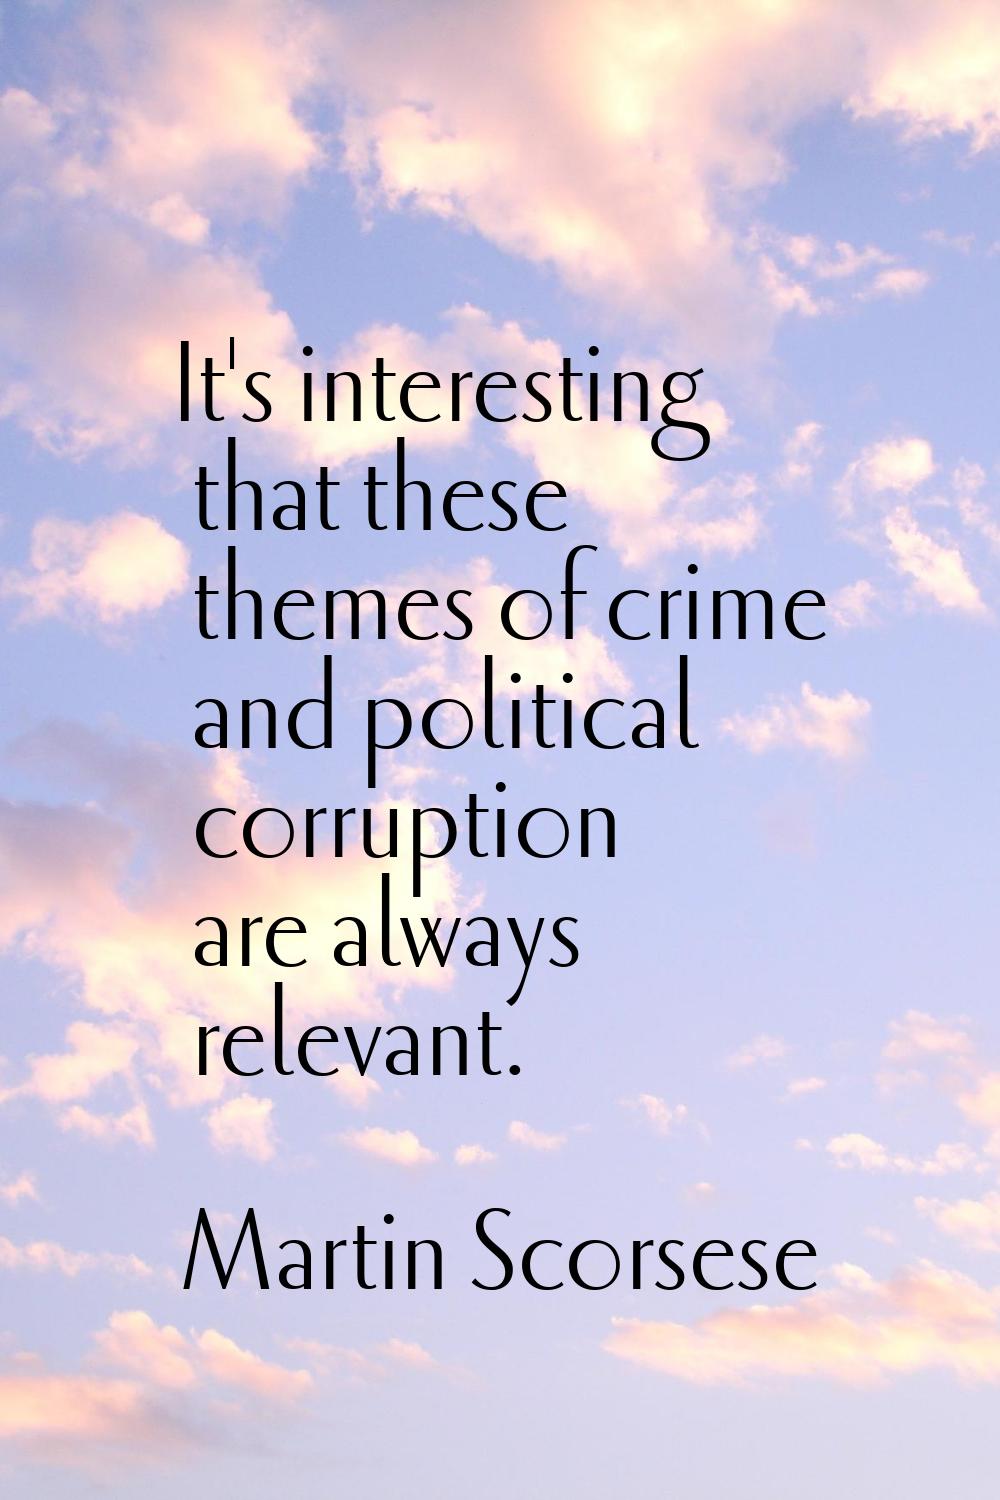 It's interesting that these themes of crime and political corruption are always relevant.